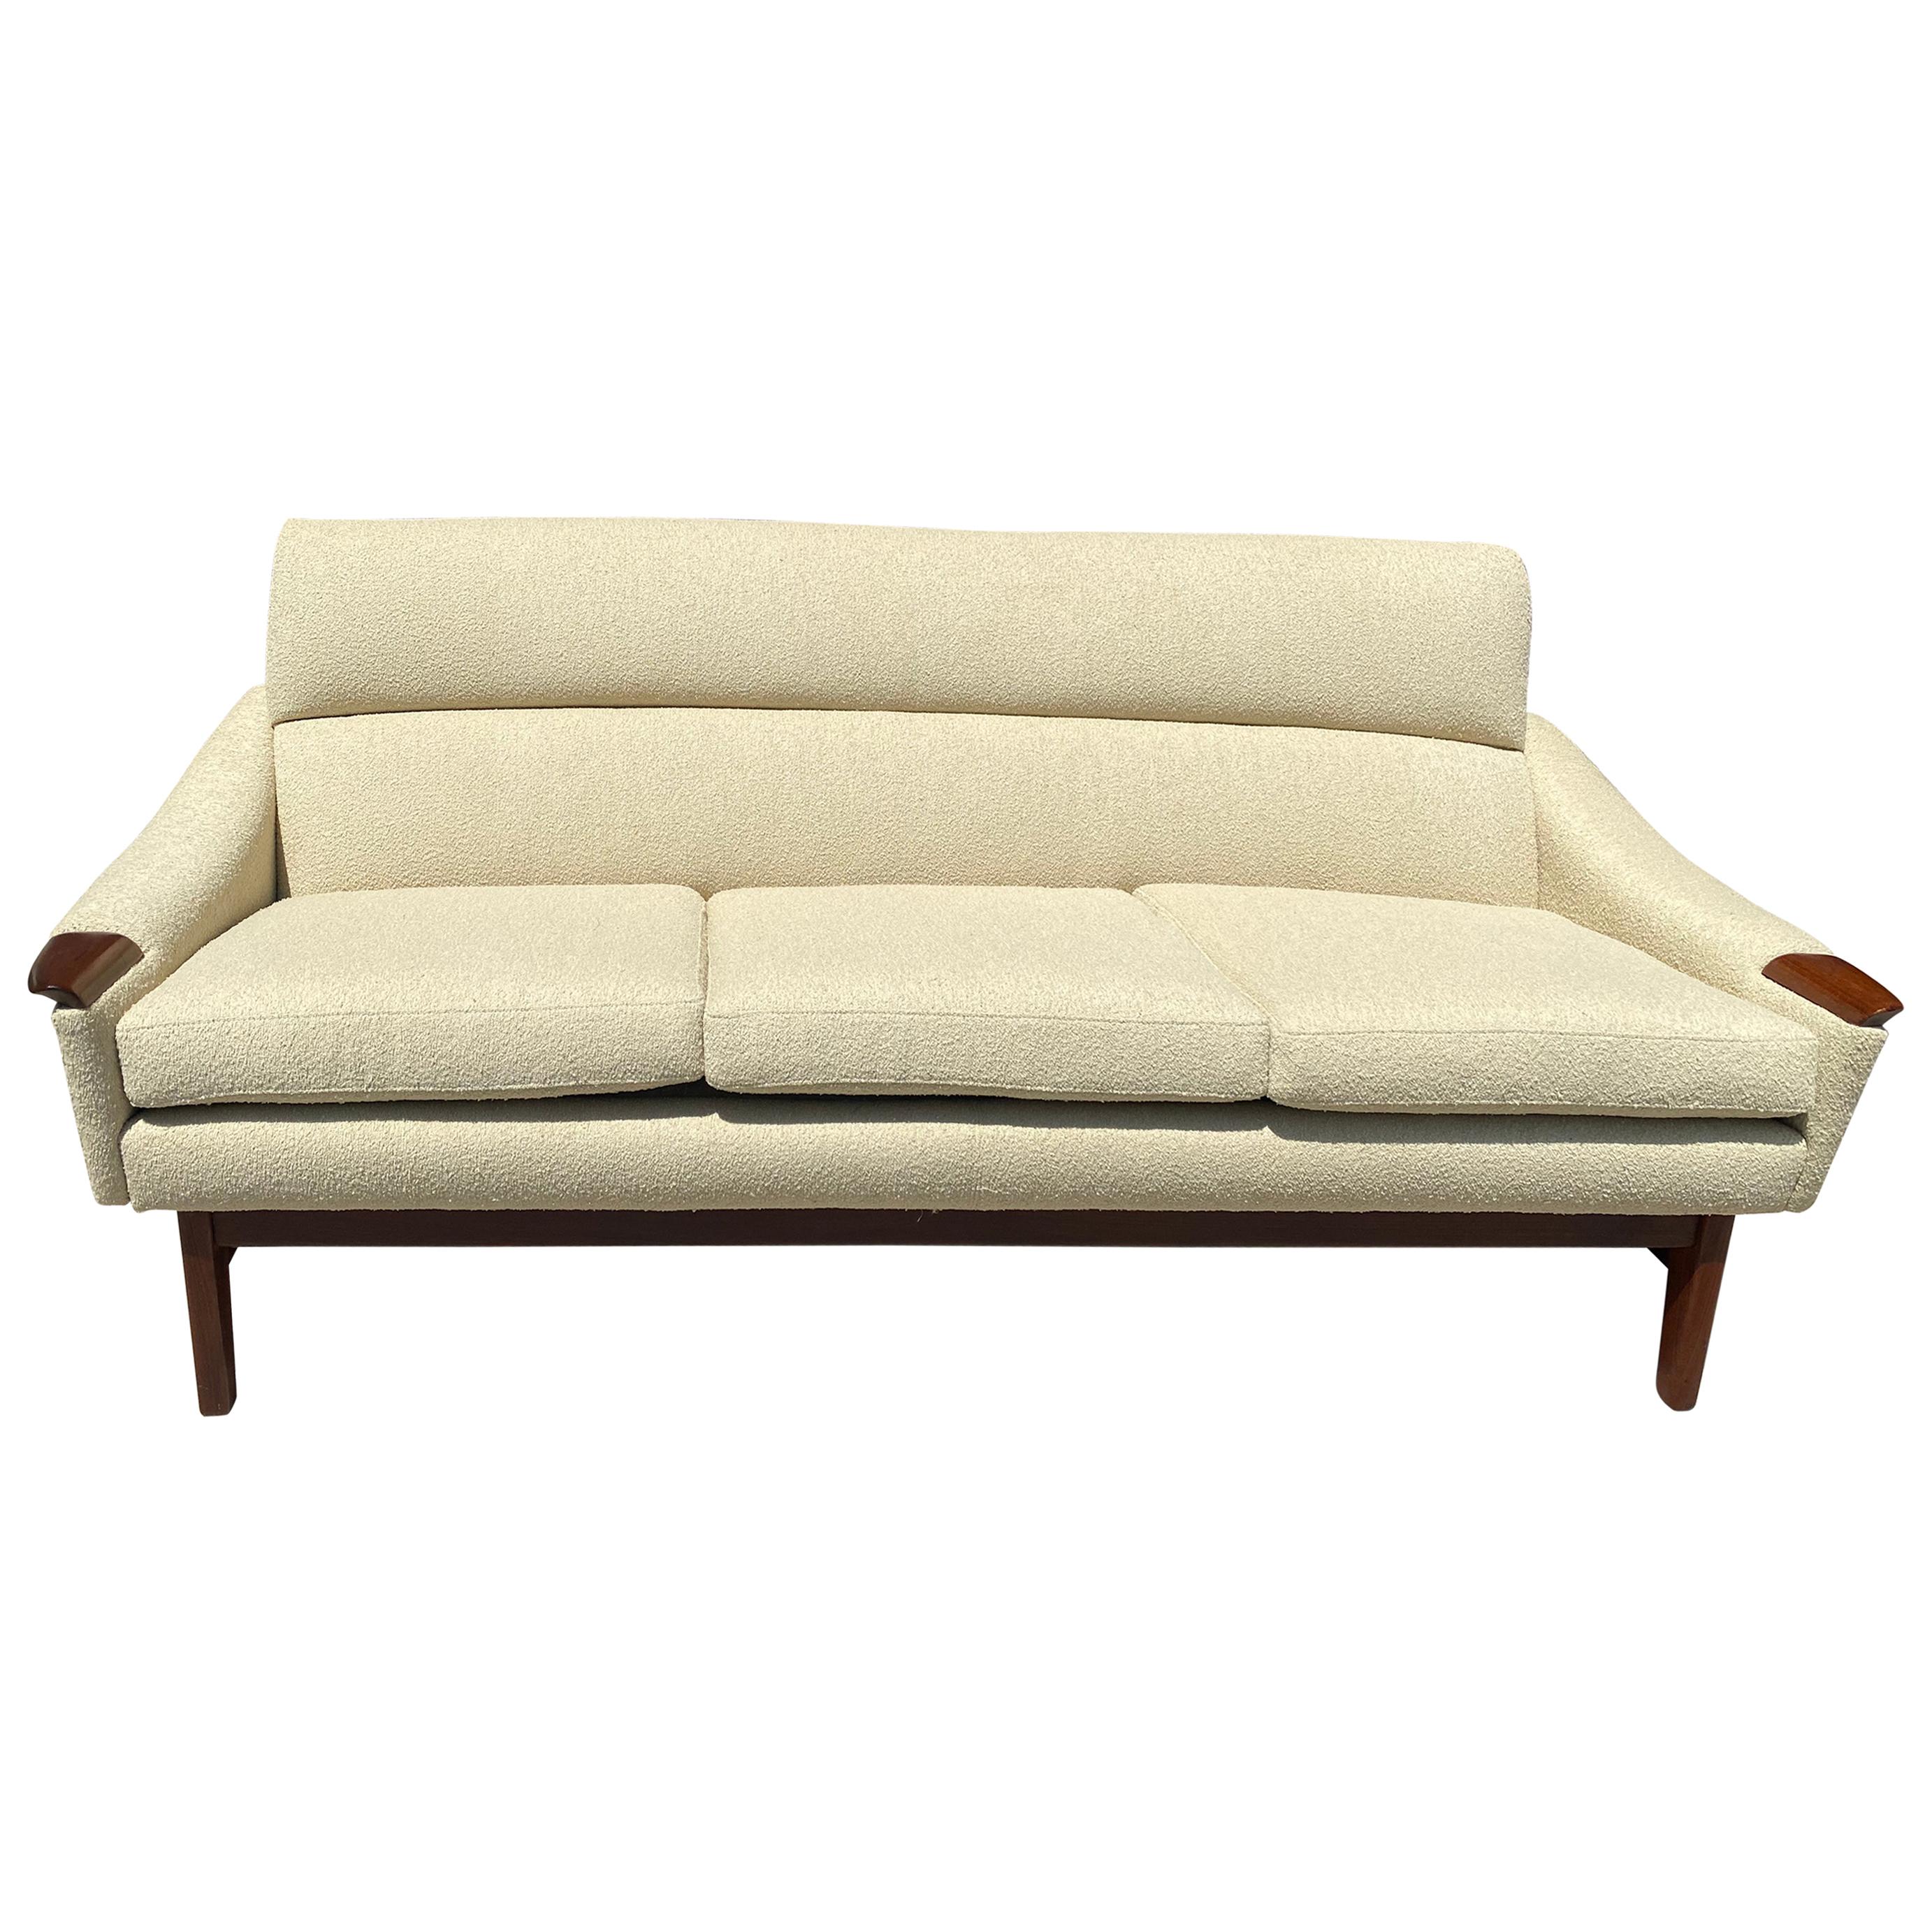 Vintage 1960s Cream Boucle Walnut Sofa by R. Huber & Co.